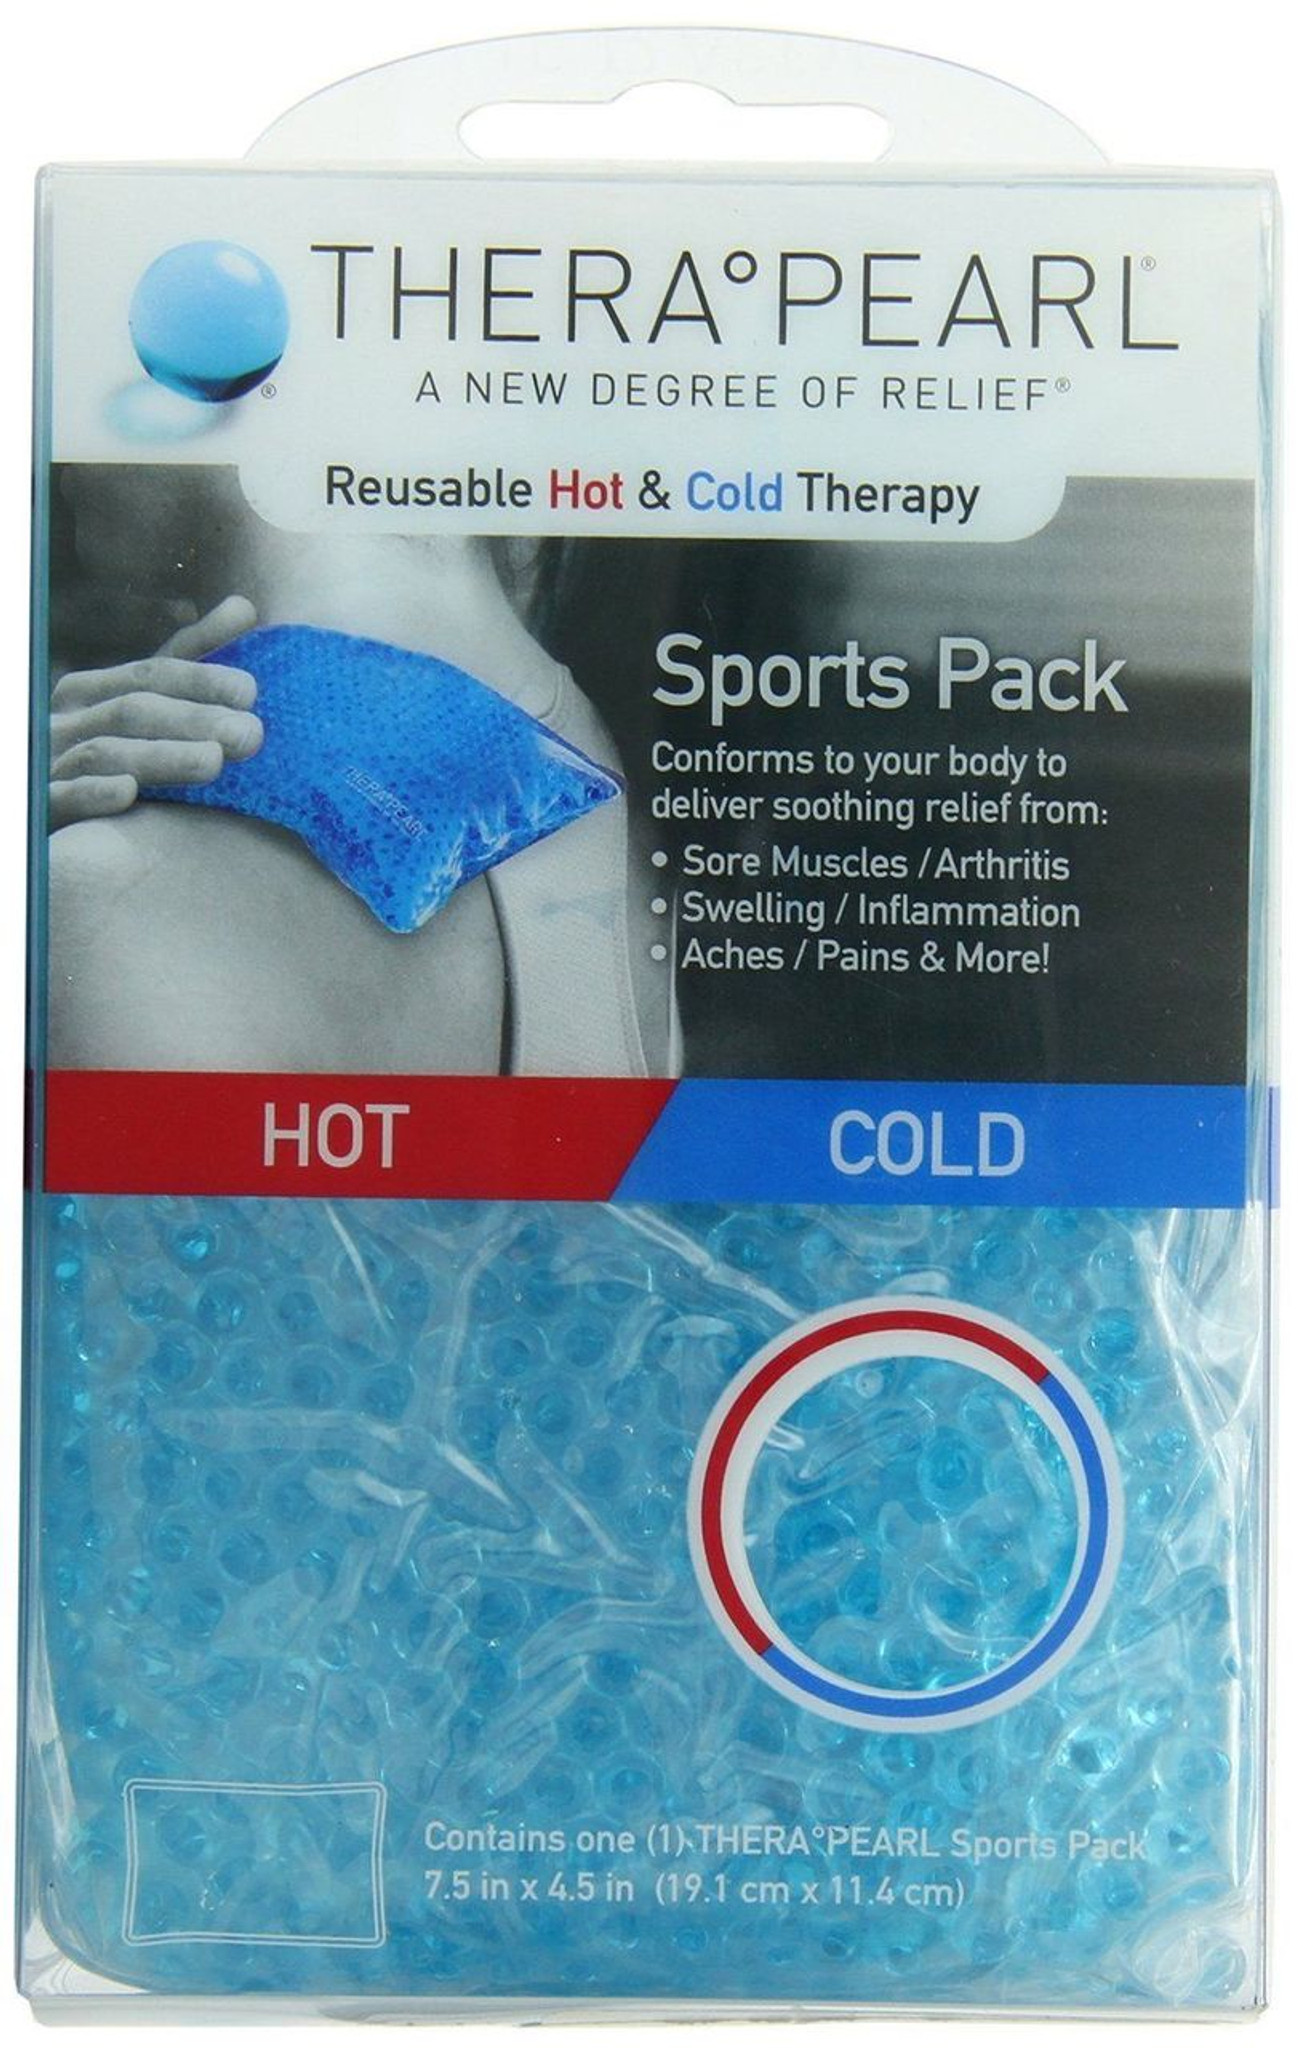 TheraPearl, 3-in-1 Breast Therapy, 2 Reusable Packs and Soft Covers